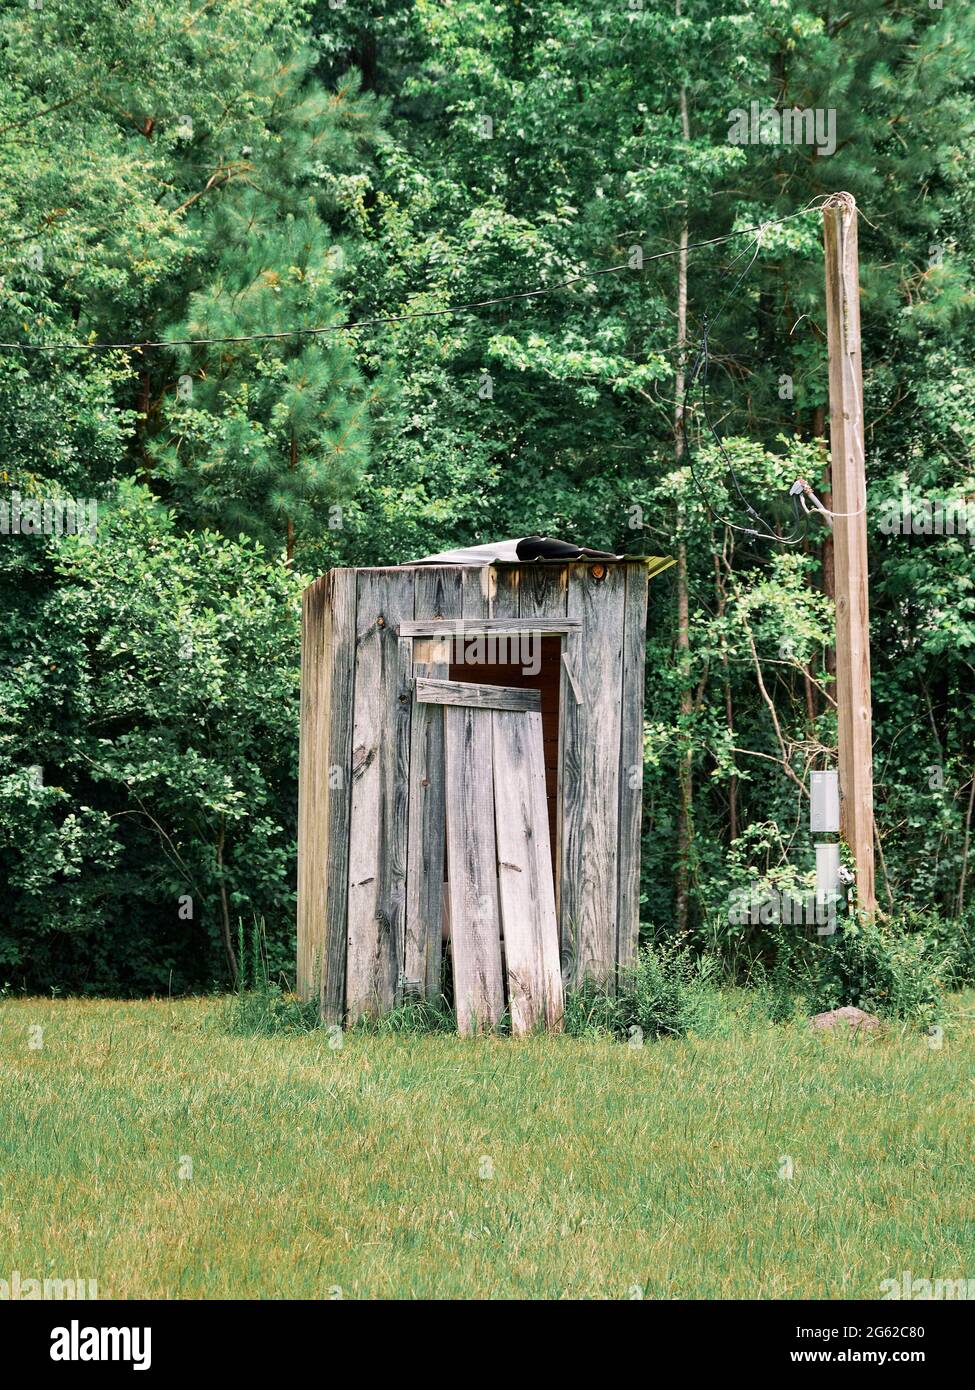 Old wooden outhouse in rural Alabama, USA. Stock Photo